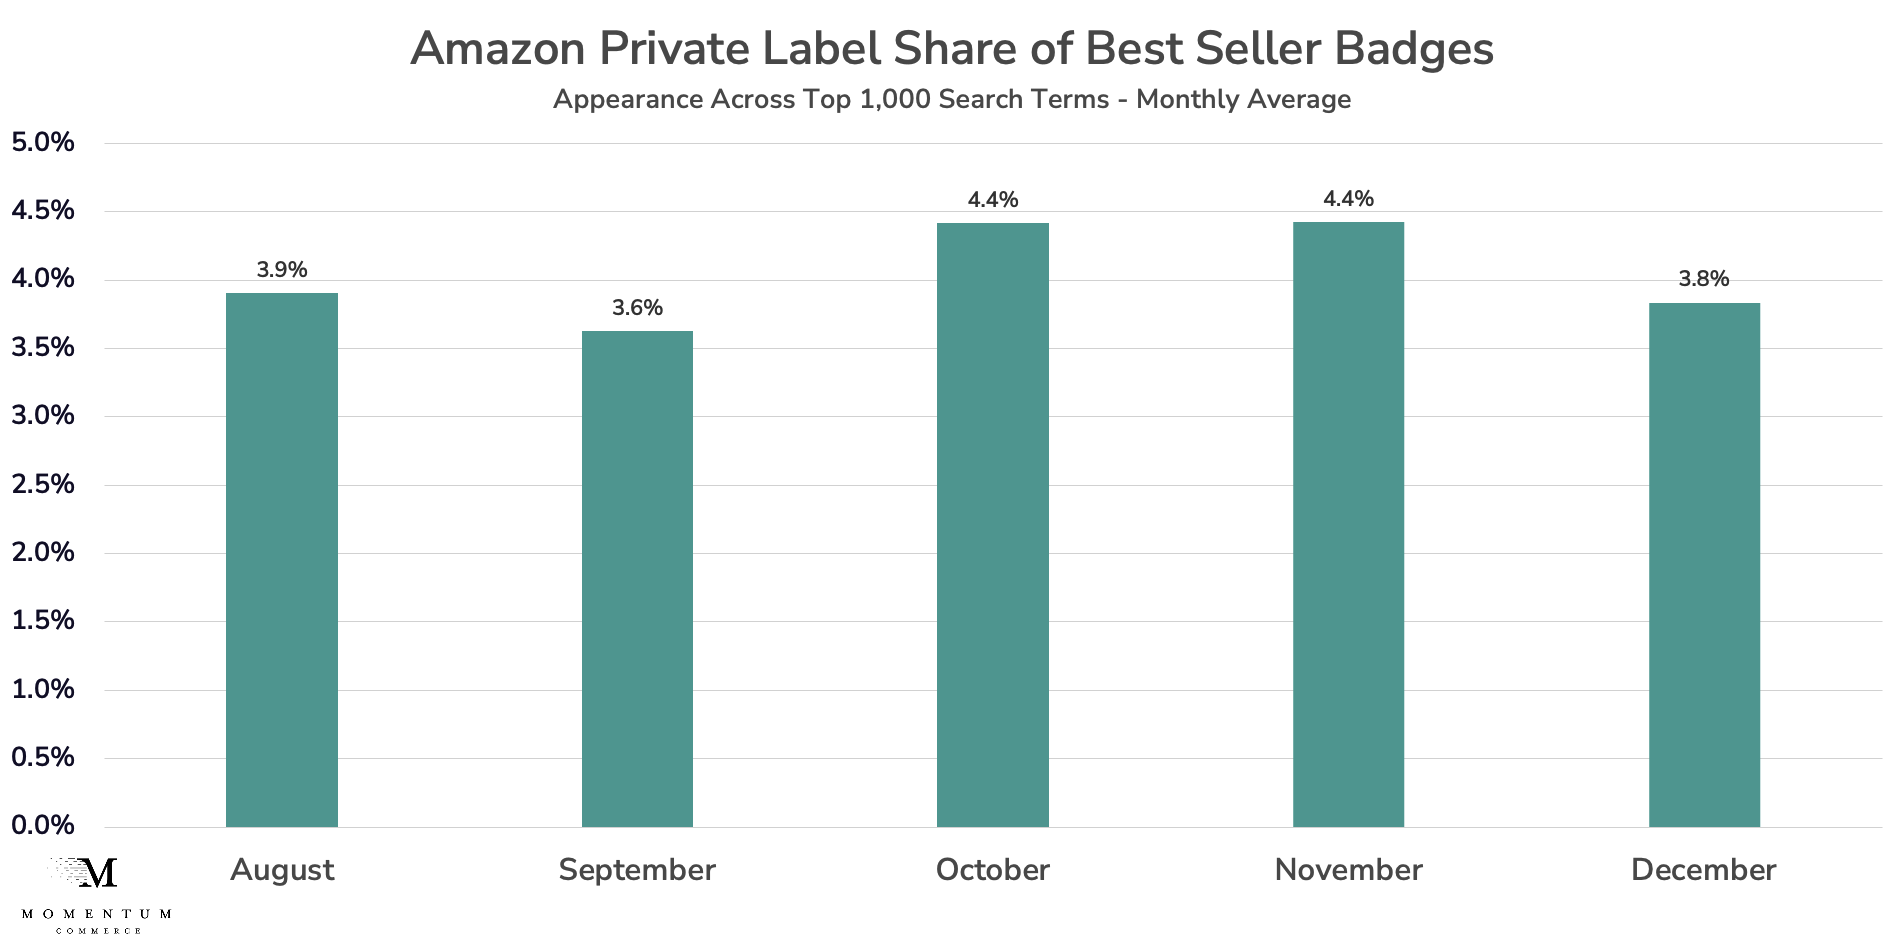 Amazon Private Label Share of Best Seller Badges